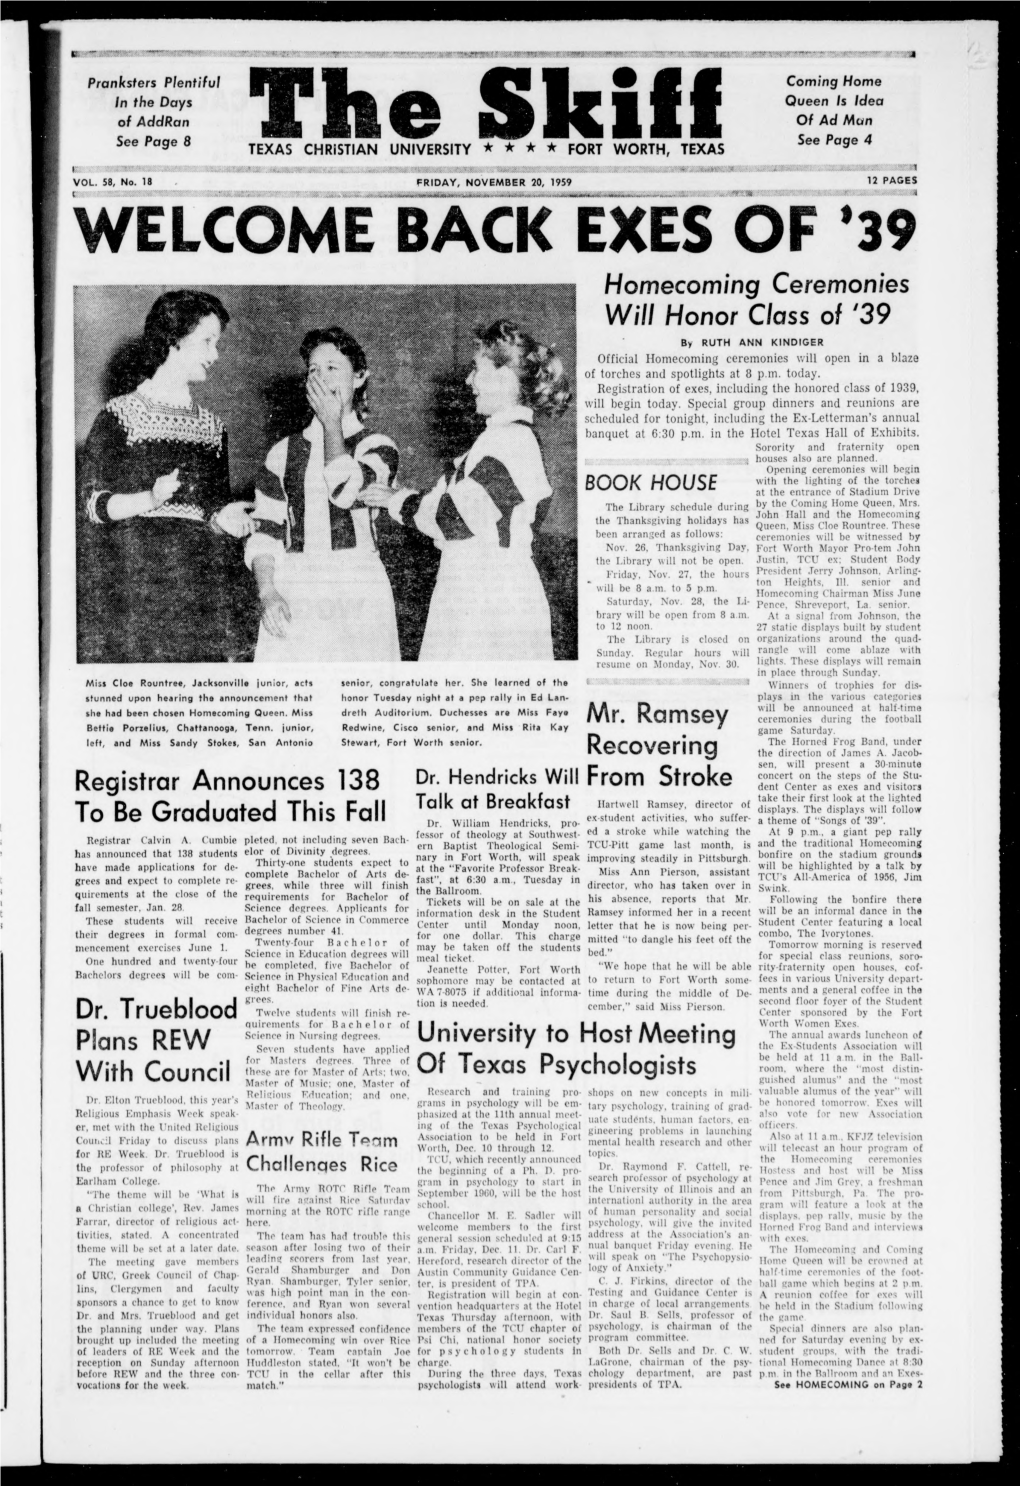 WELCOME BACK EXES of '39 Homecoming Ceremonies Will Honor Class of '39